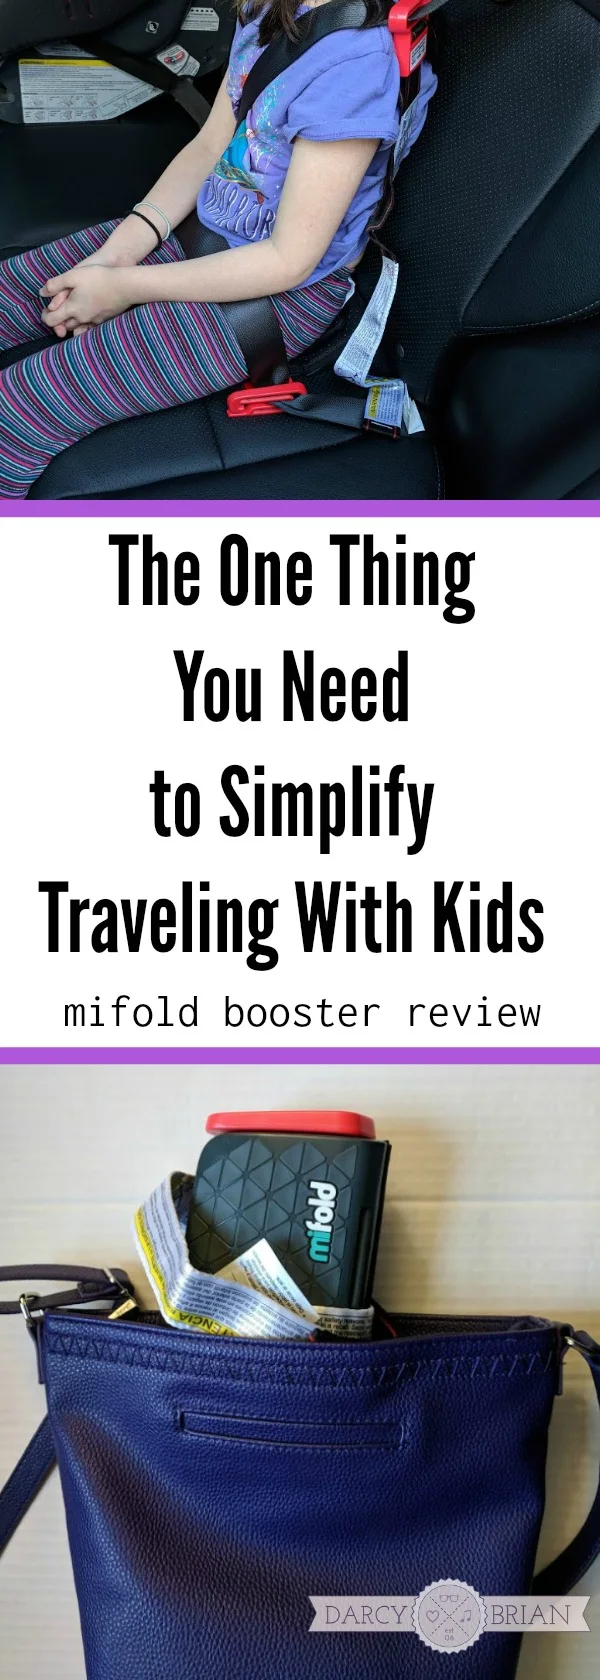 AD: Planning your next family vacation but not sure what to do about booster seats? Whether you are renting a car, flying, taking the train, or want to use taxis, Uber, or Lyft to get around at your destination, learn more about this portable booster seat that is perfect for family travel! It's also perfect for carpooling! The One Thing You Need to Simplify Traveling With Kids #familytravel #kids